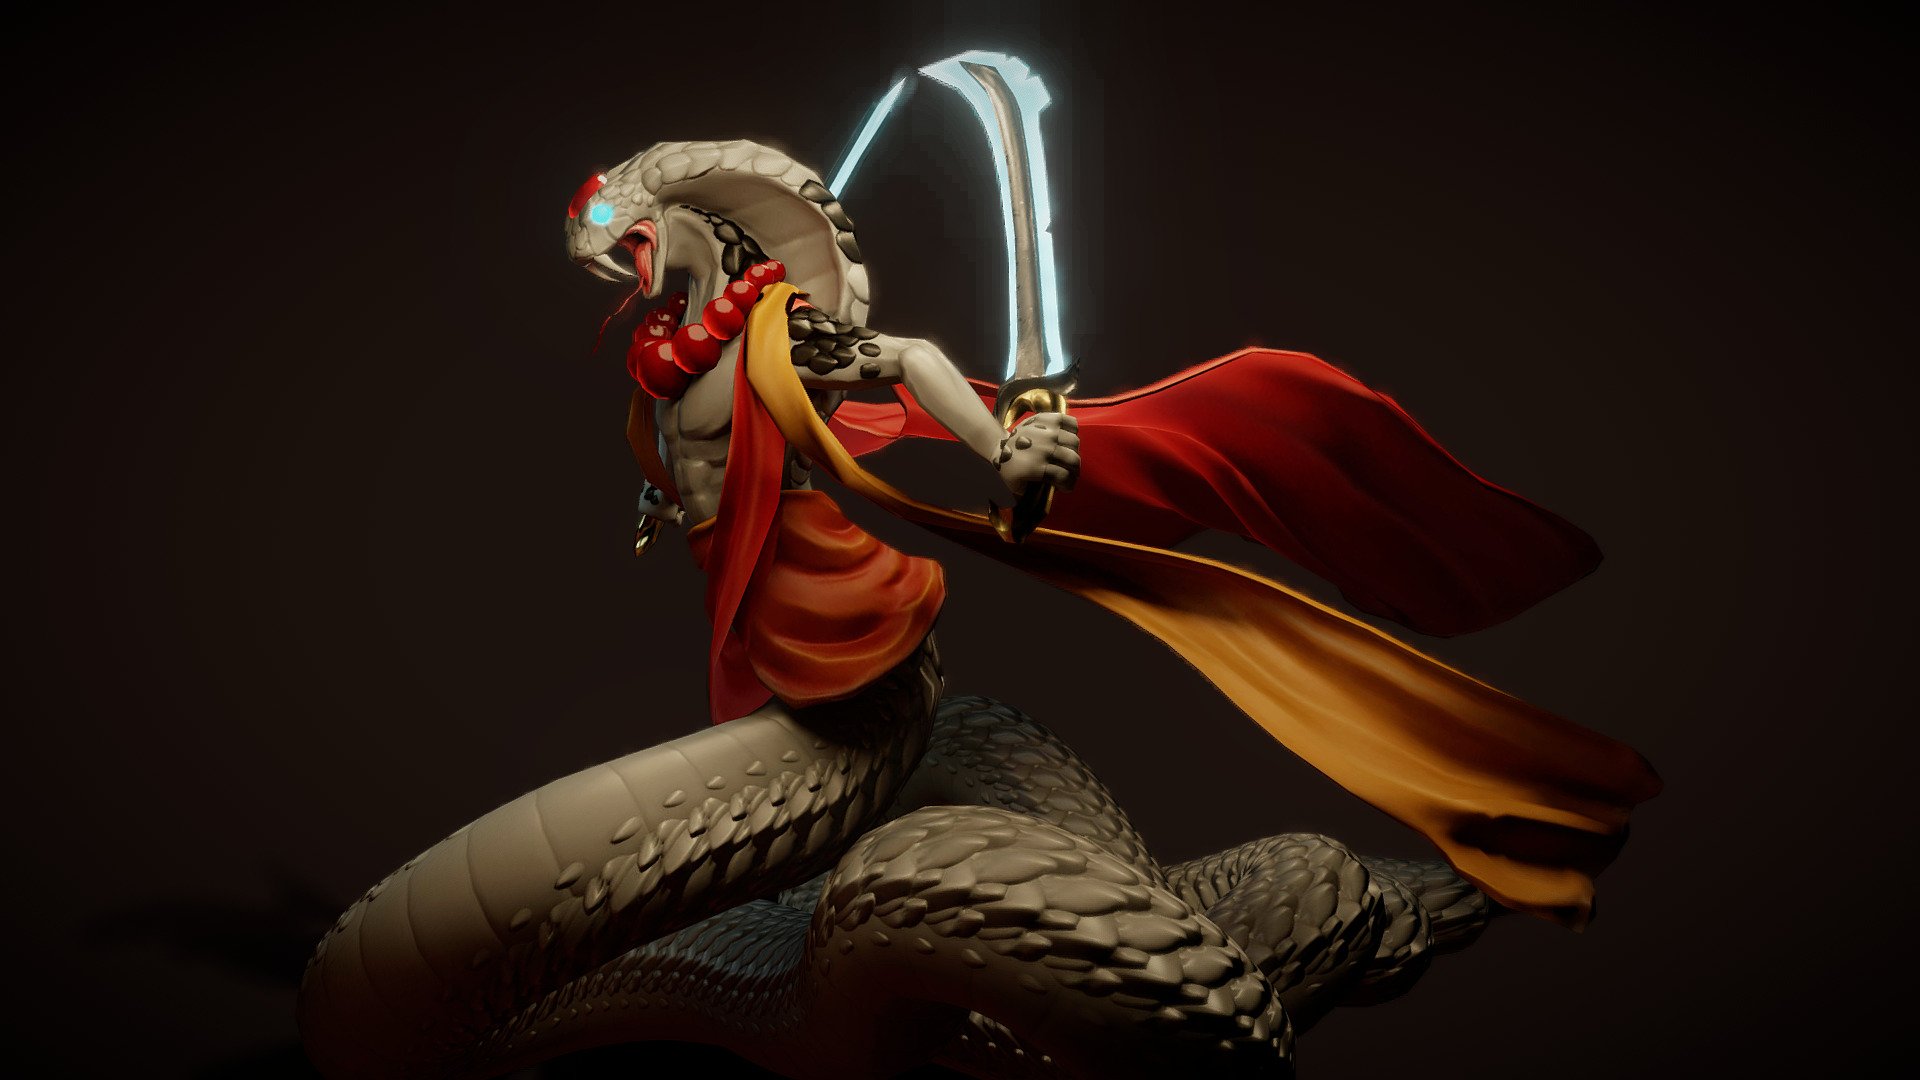 This dangerous naga is the one who protects the poison chamber from thieves. In the temple there are no other guardians as dangerous as him, so be careful, and if you need to kill someone maybe a dagger is a better option.

Model ready for to use in video games 3d model